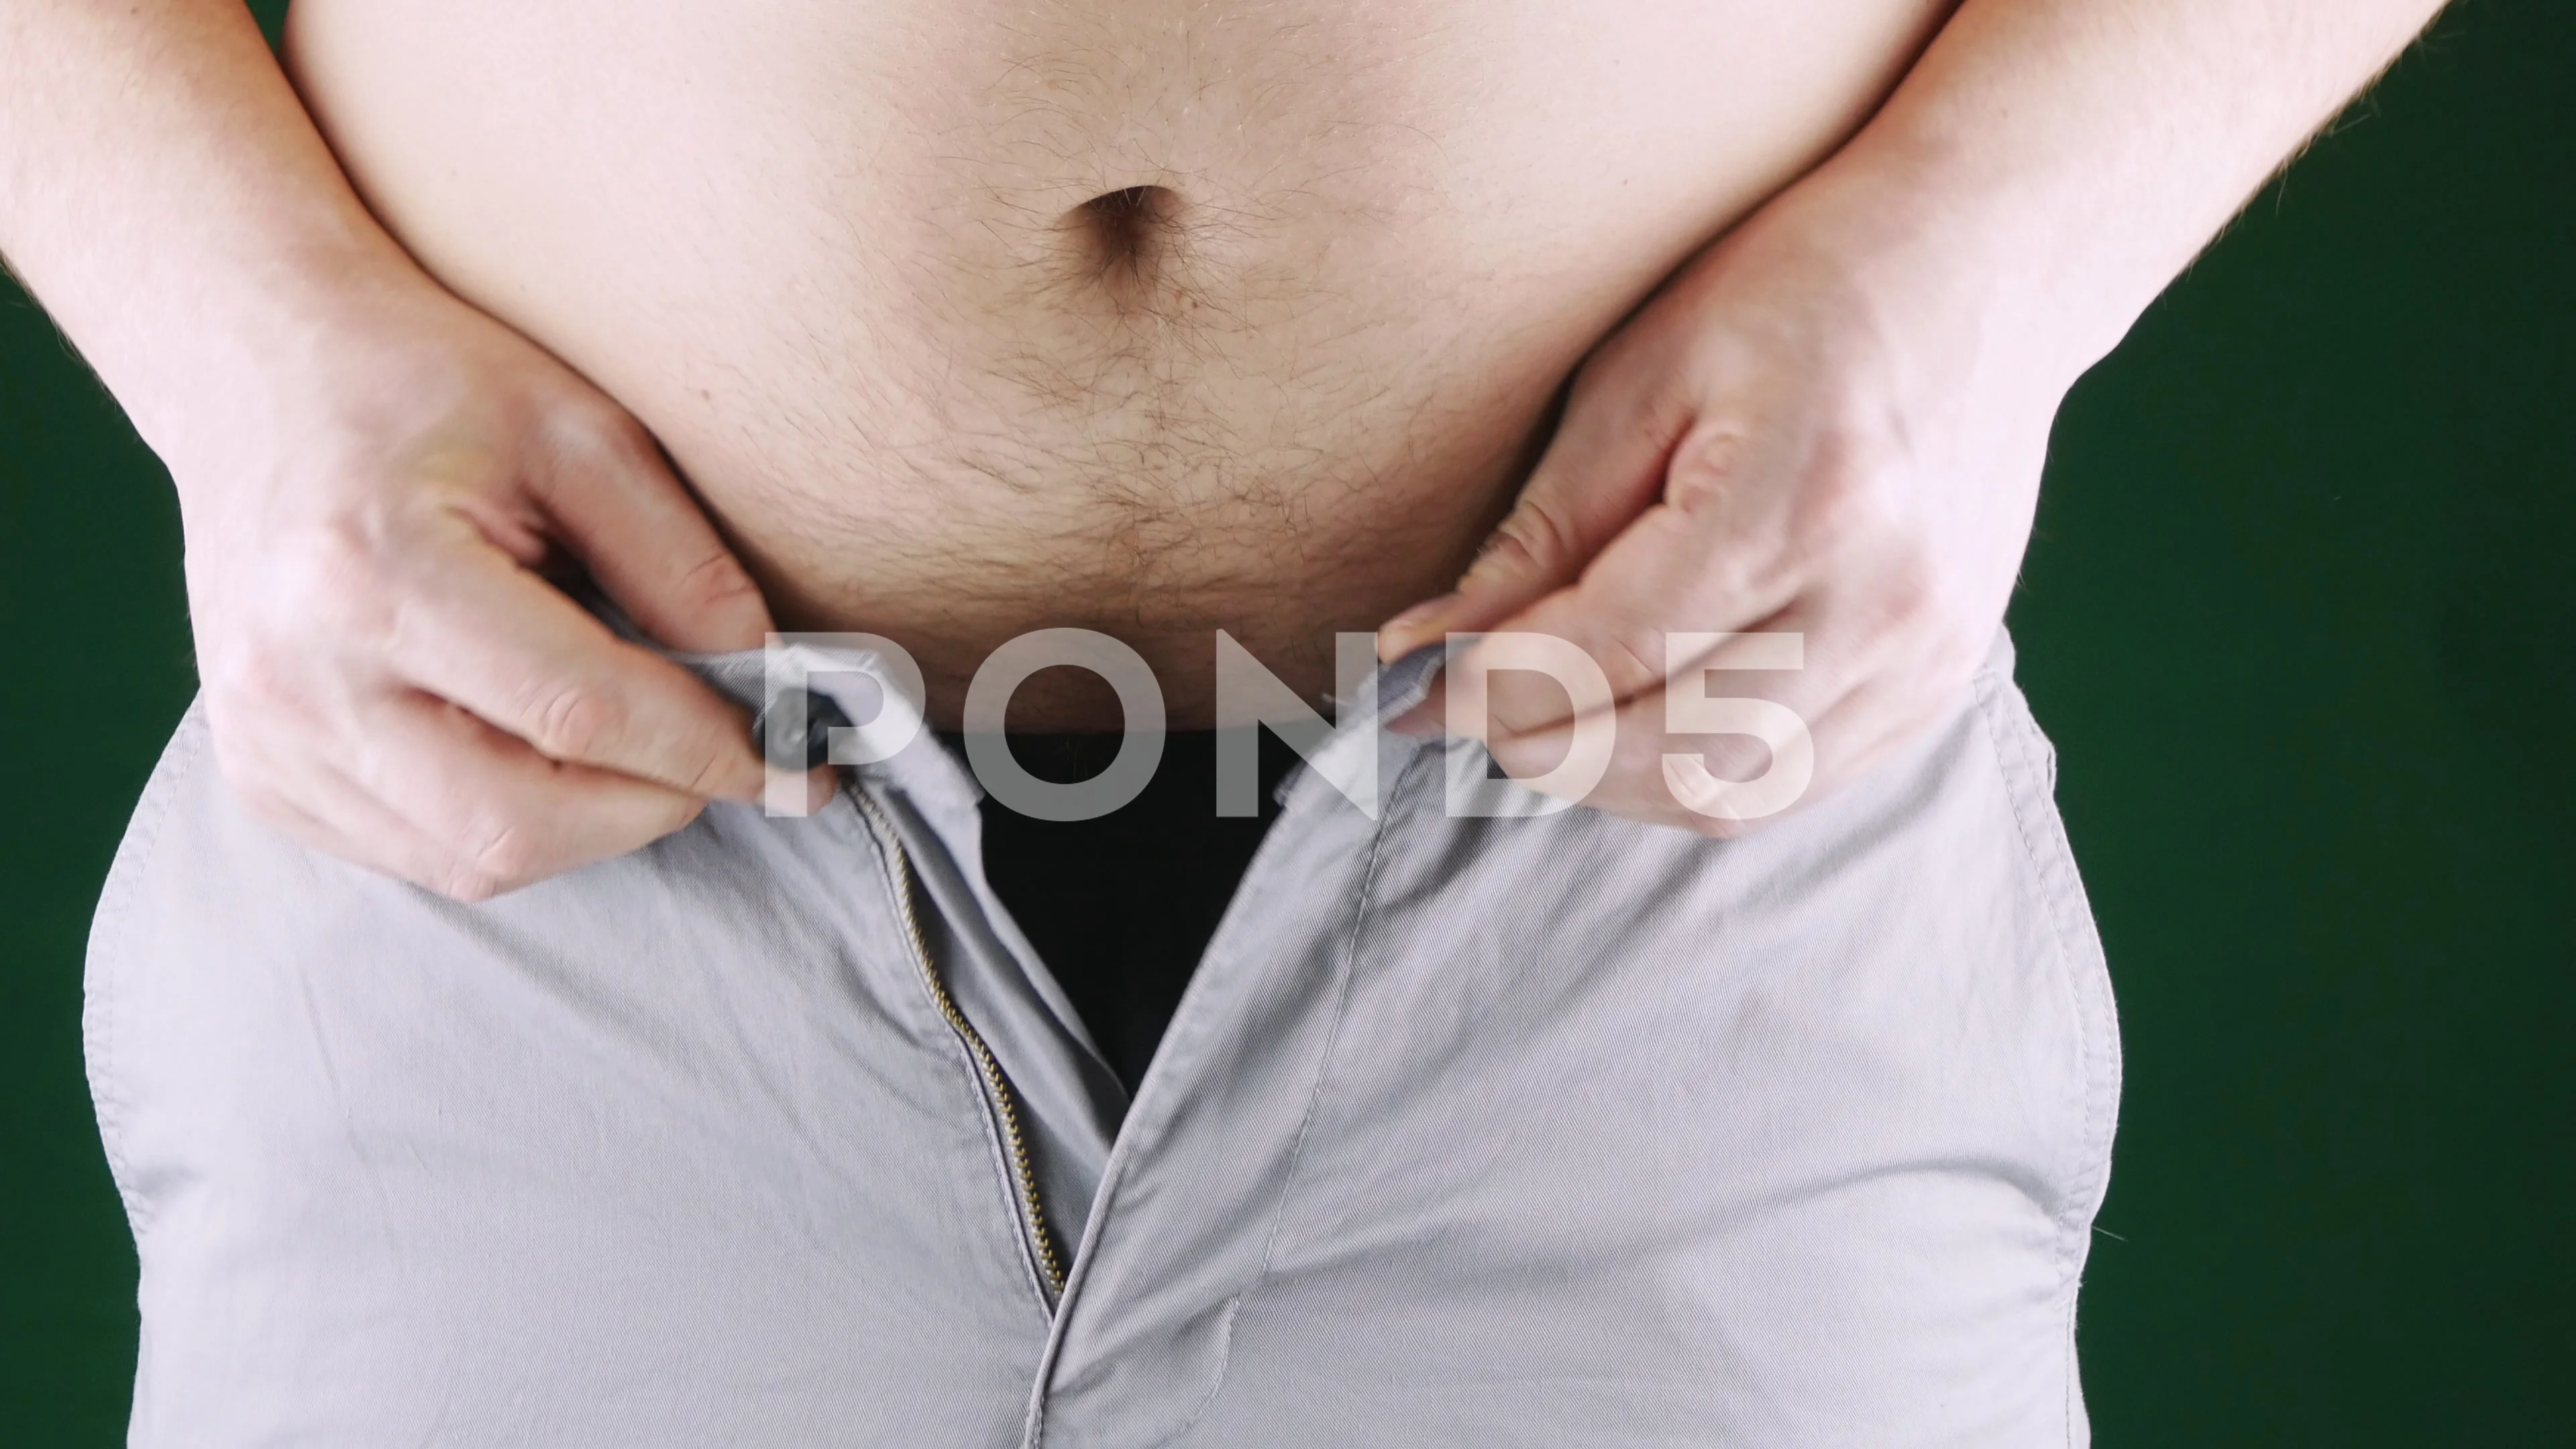 Fat man trying to put on pants. Big Paunch Stock Photo by